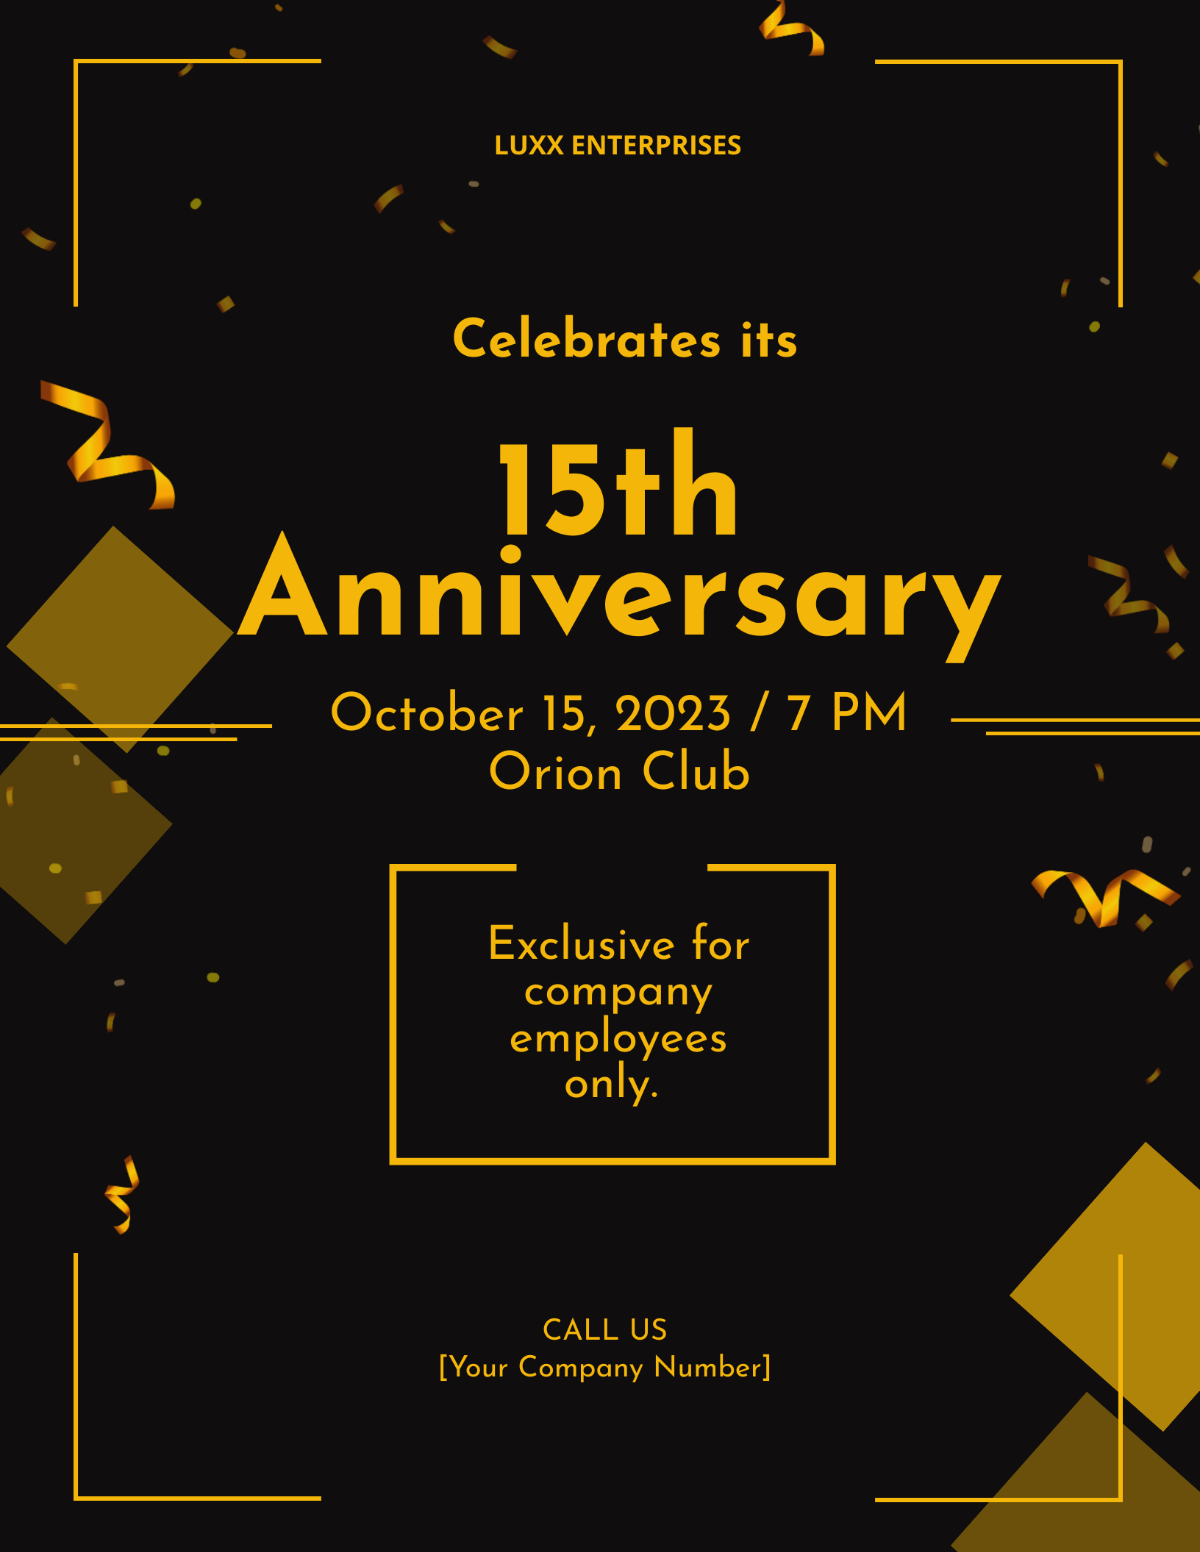 Anniversary And Birthday Party Flyer Template